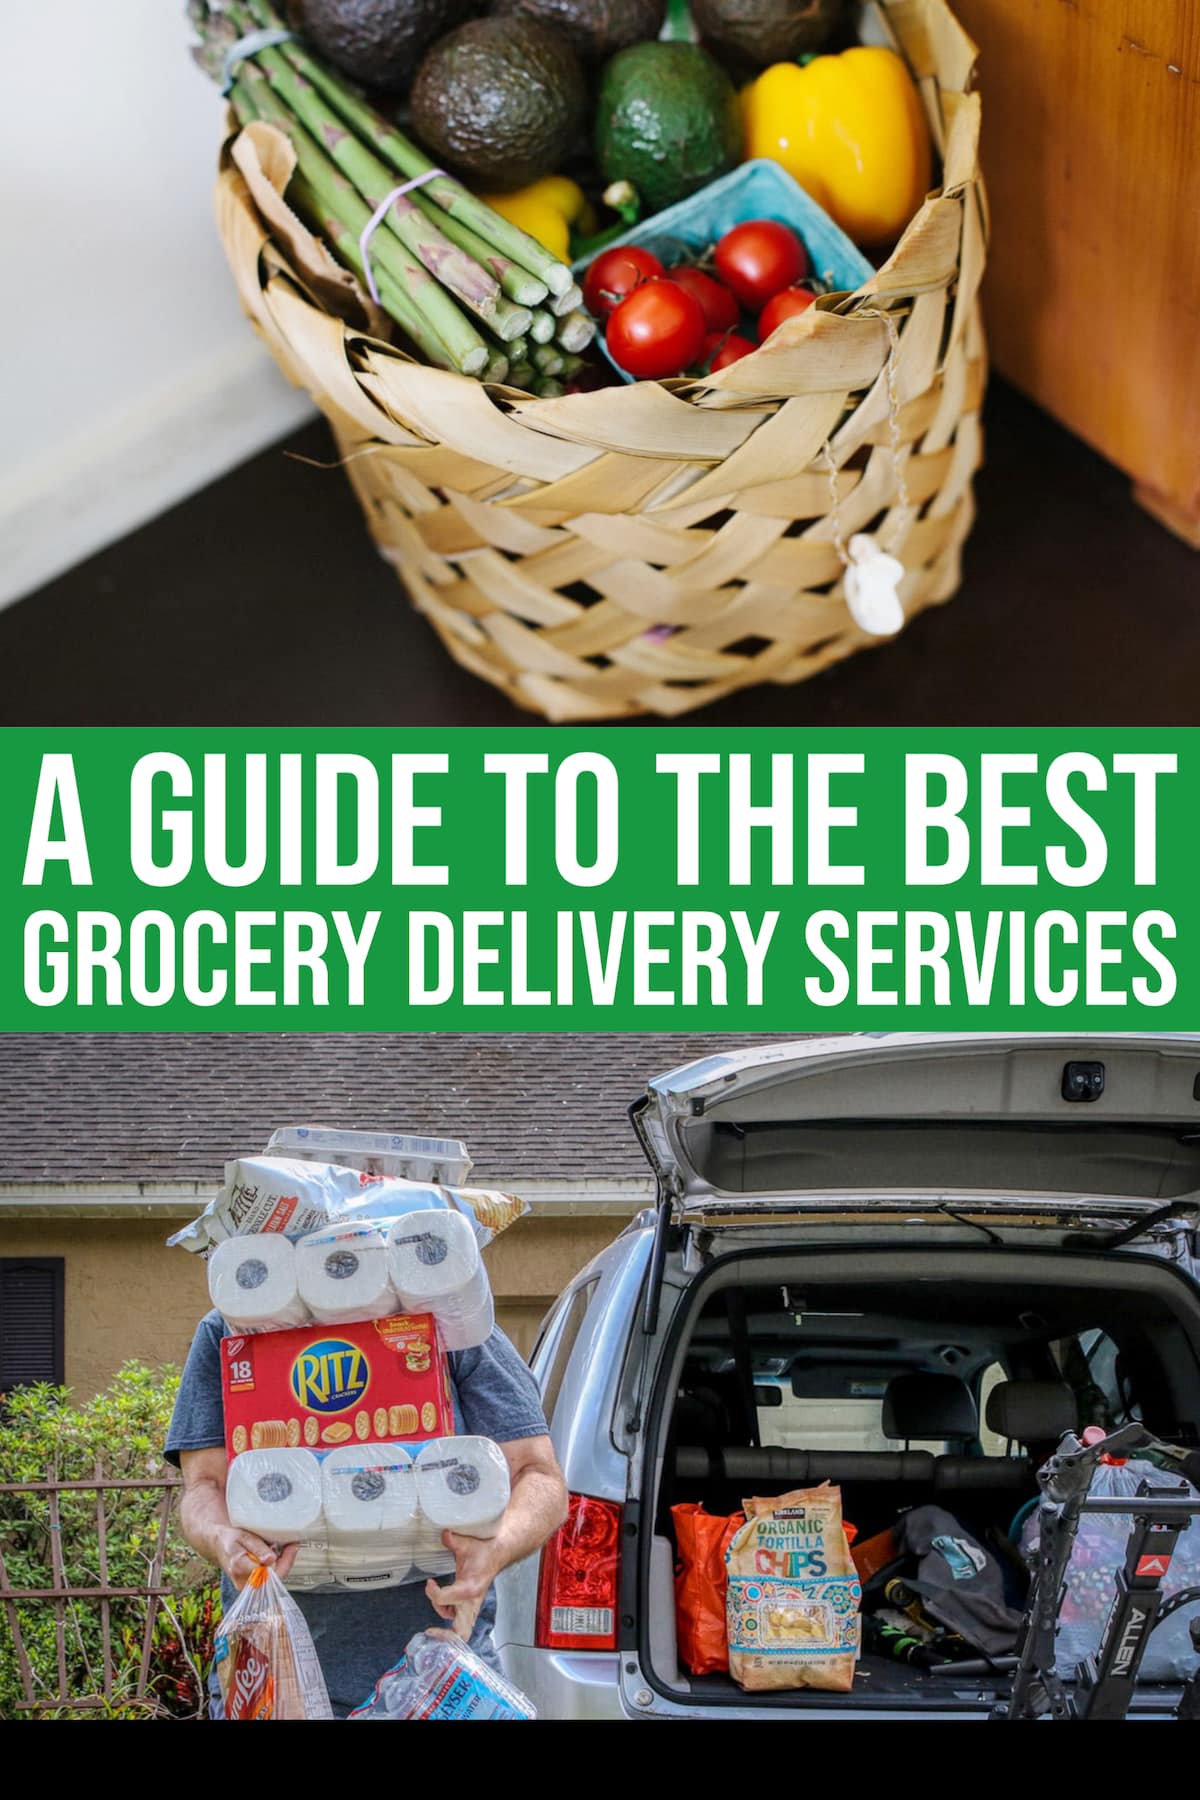 Top 5 Best Grocery Delivery Services: A Comprehensive List